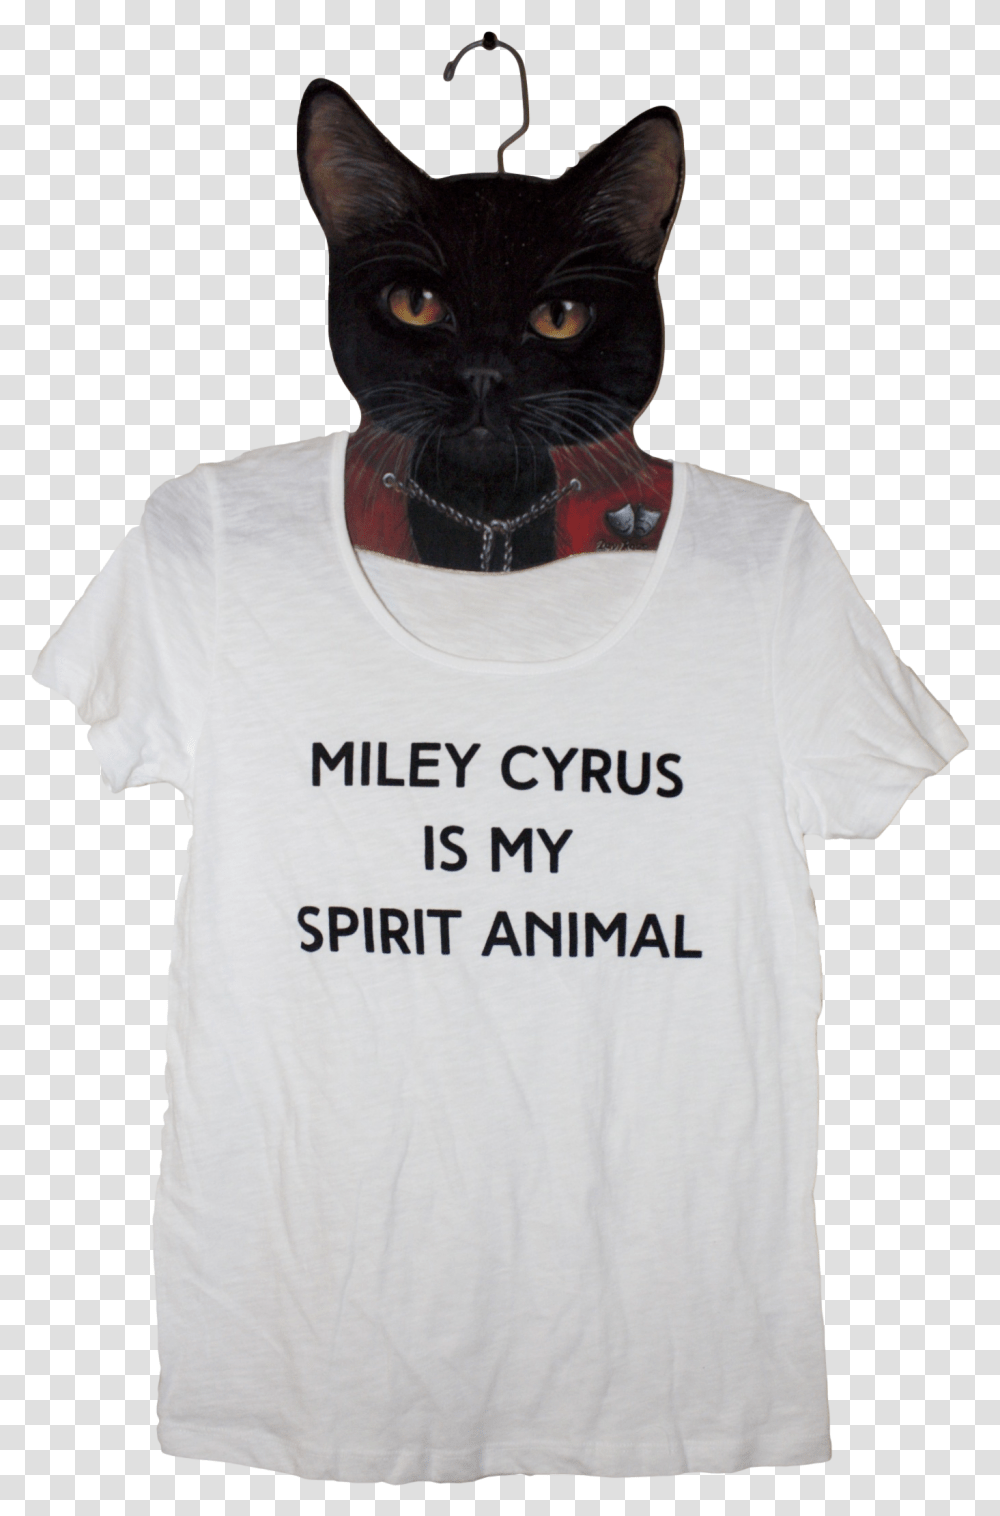 Miley Cyrus Is My Spirit Animal Sold By Vampp Black Cat, Clothing, Apparel, T-Shirt, Person Transparent Png